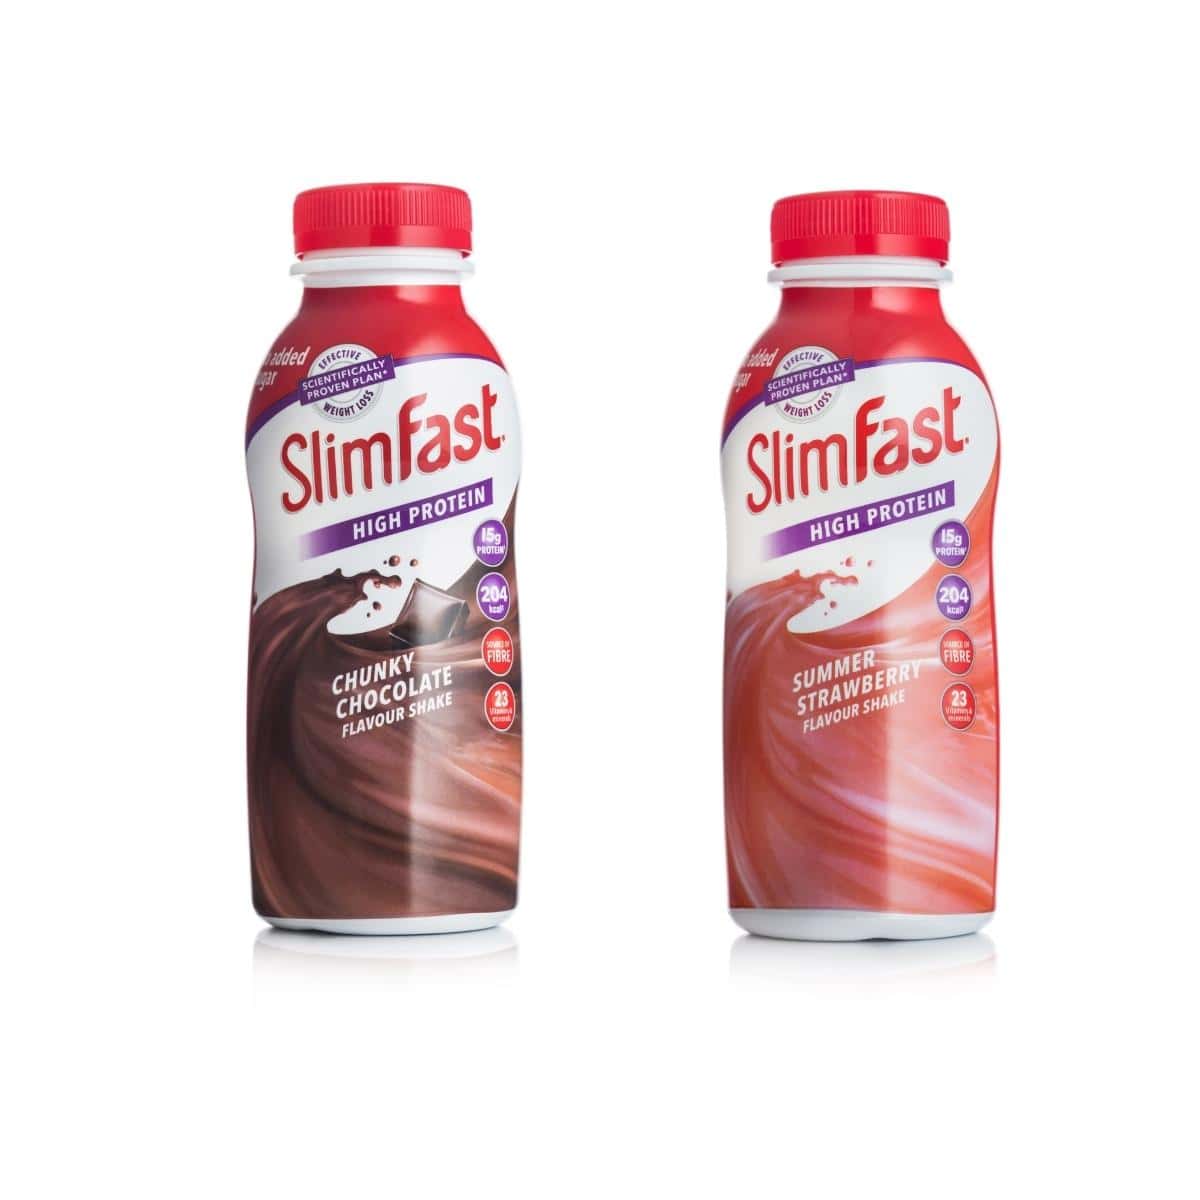 Two slim fast shake ready made bottles, one chocolate flavour and the other strawberry.